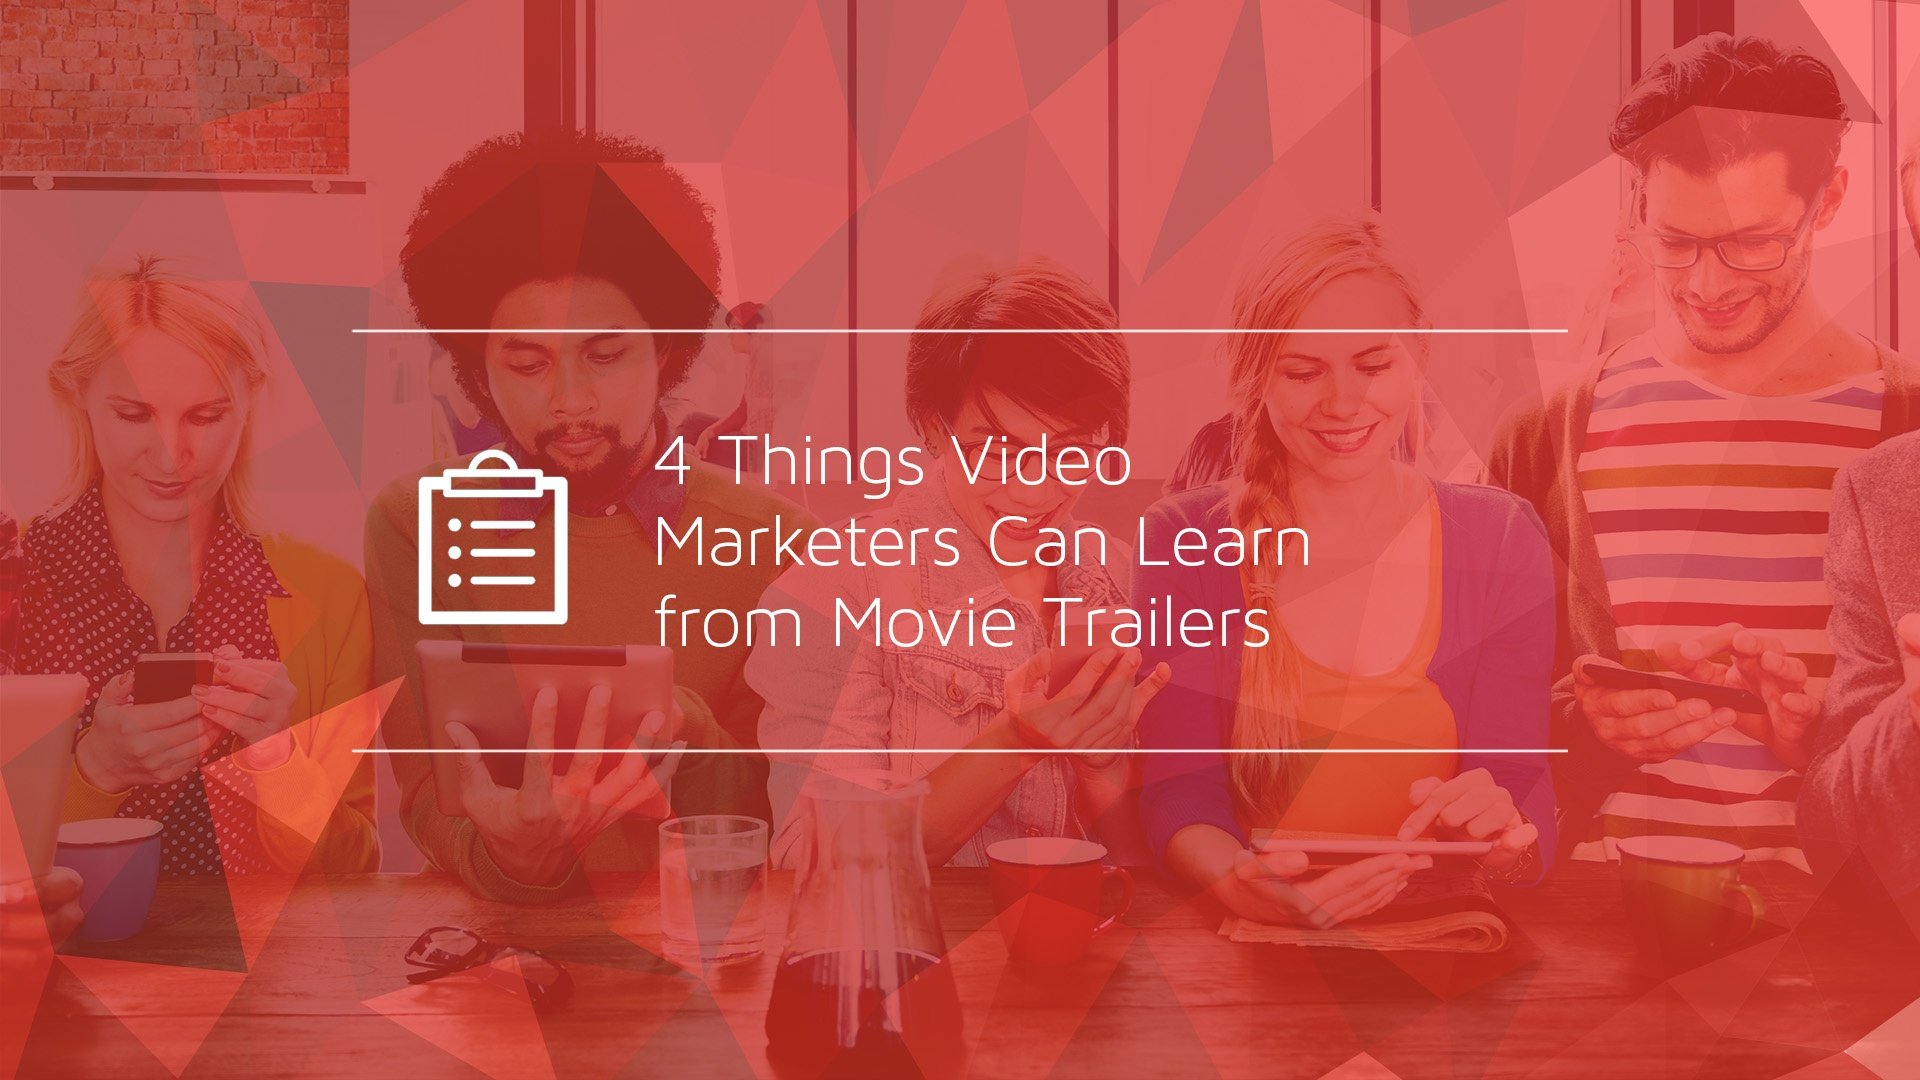 4 Things Video Marketers Can Learn from Movie Trailers .jpg